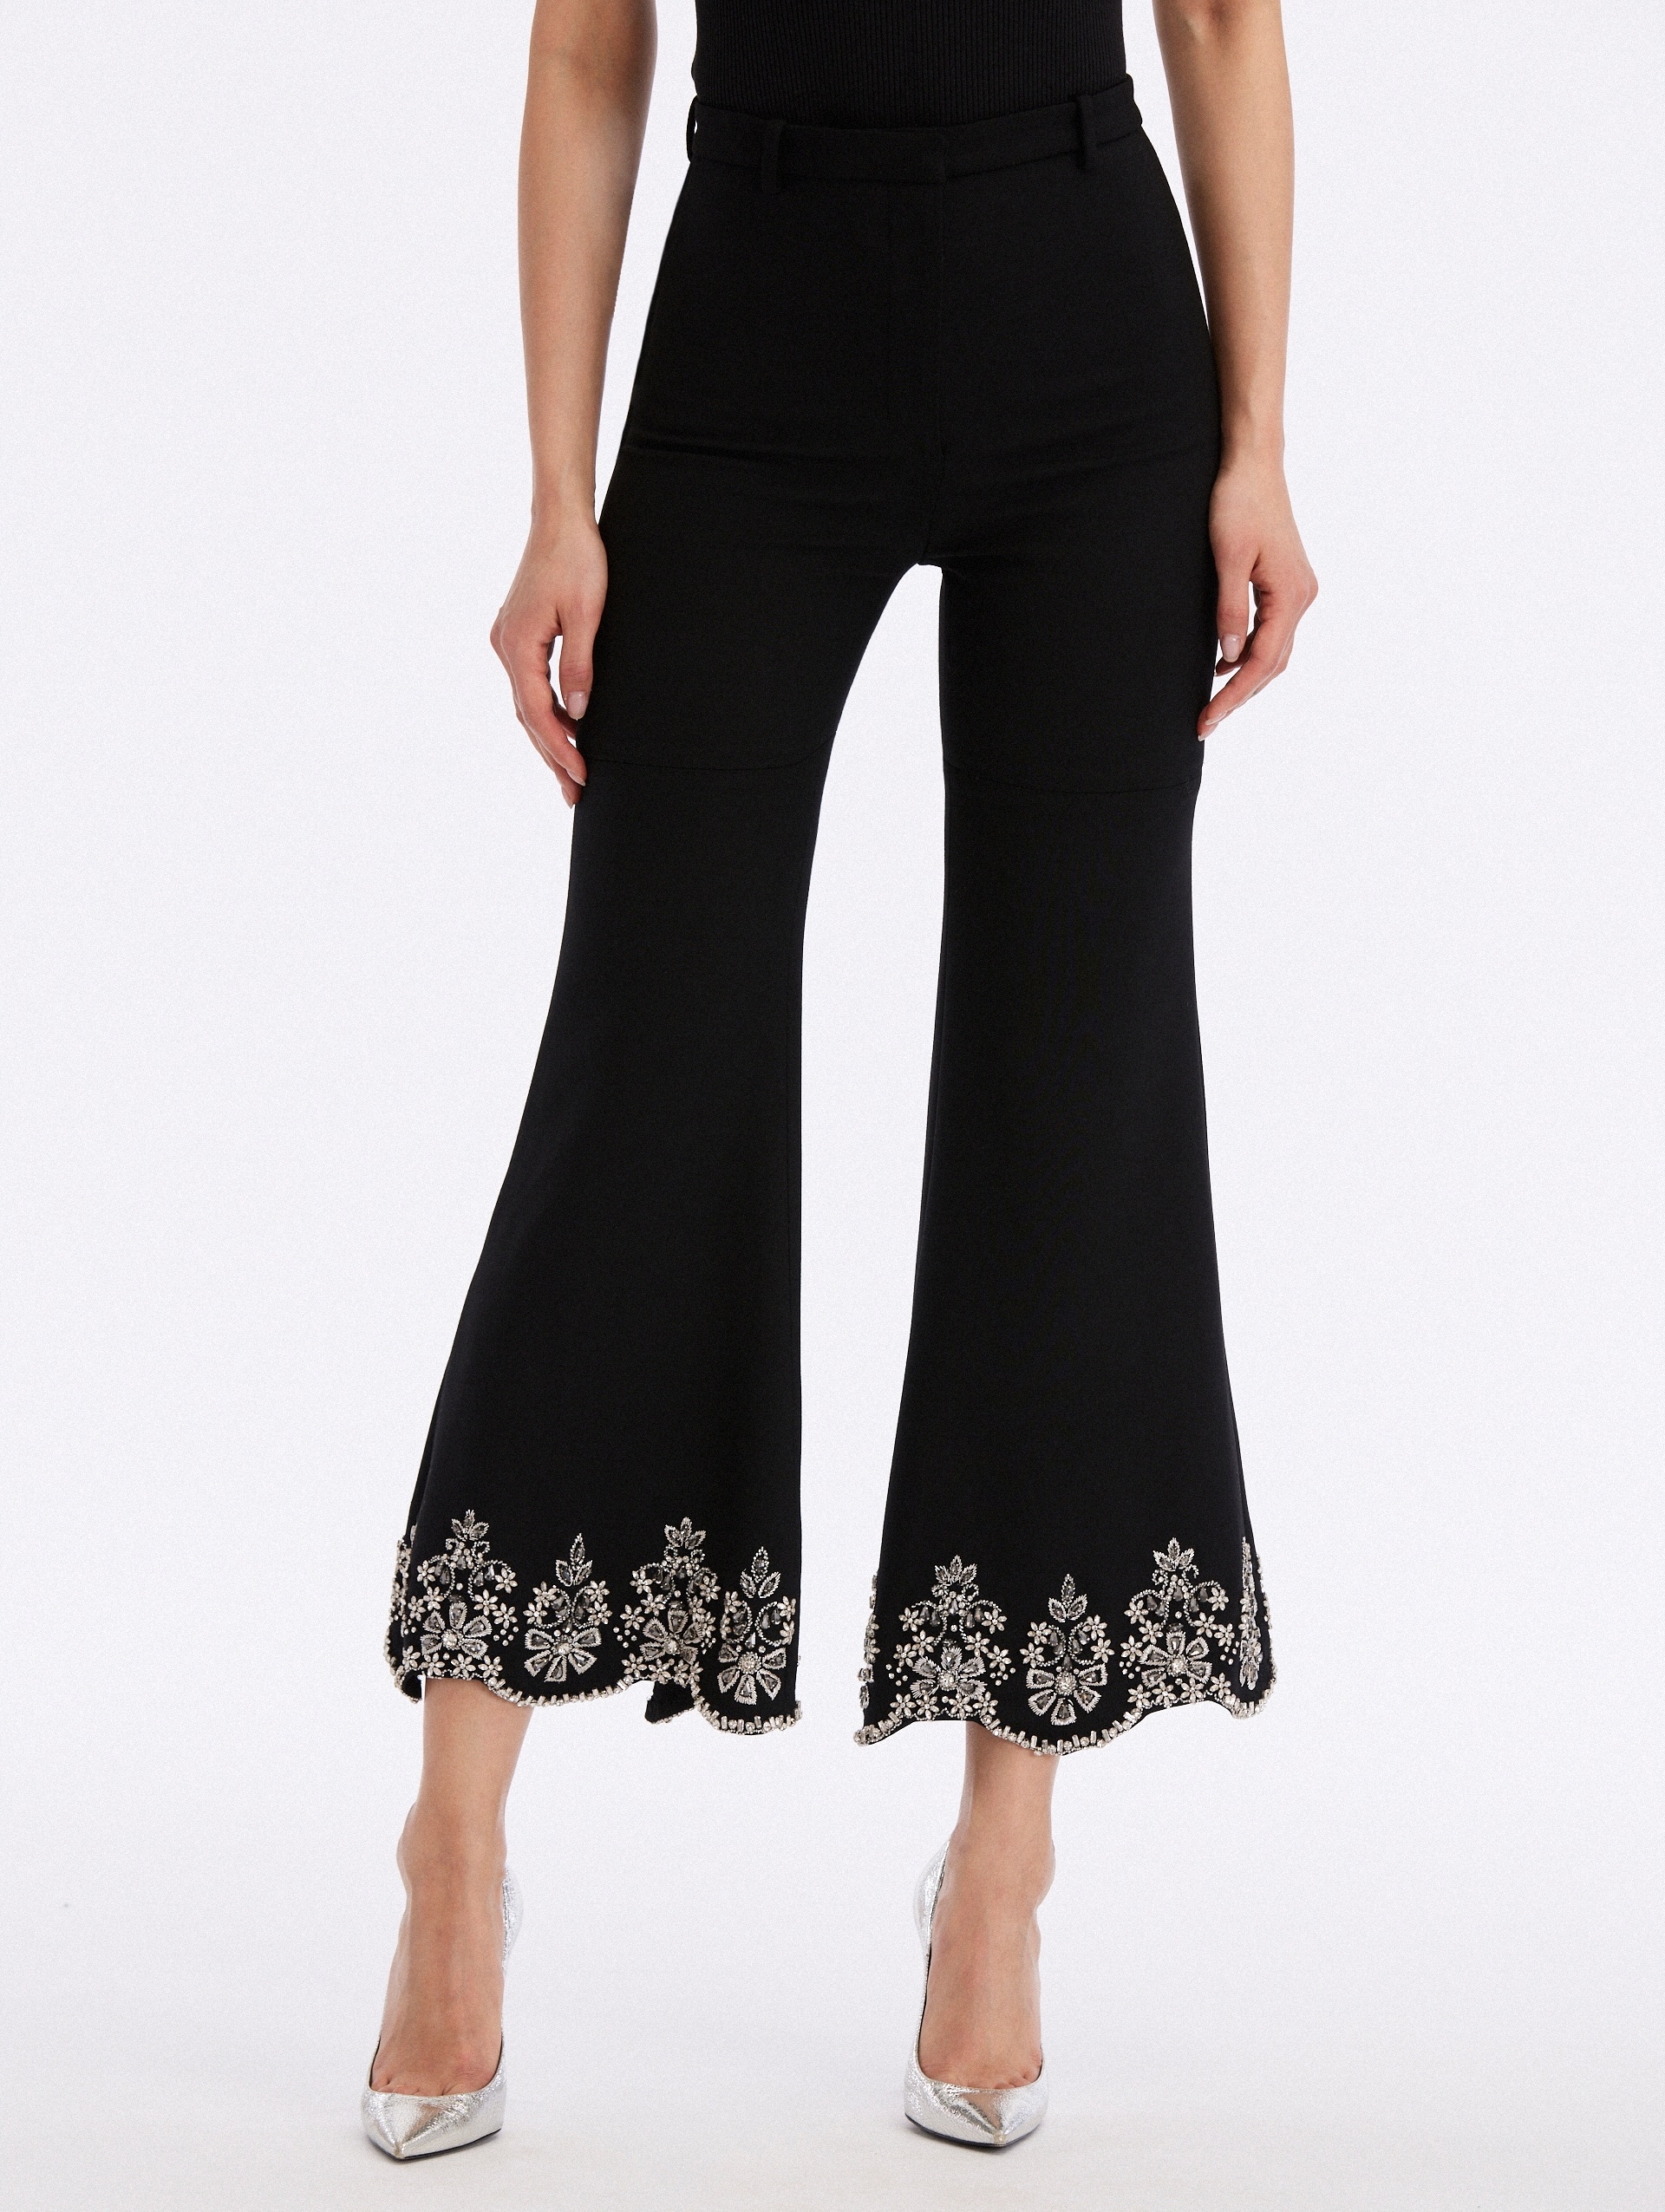 CRYSTAL SCALLOP EMBROIDERED PANTS - 4